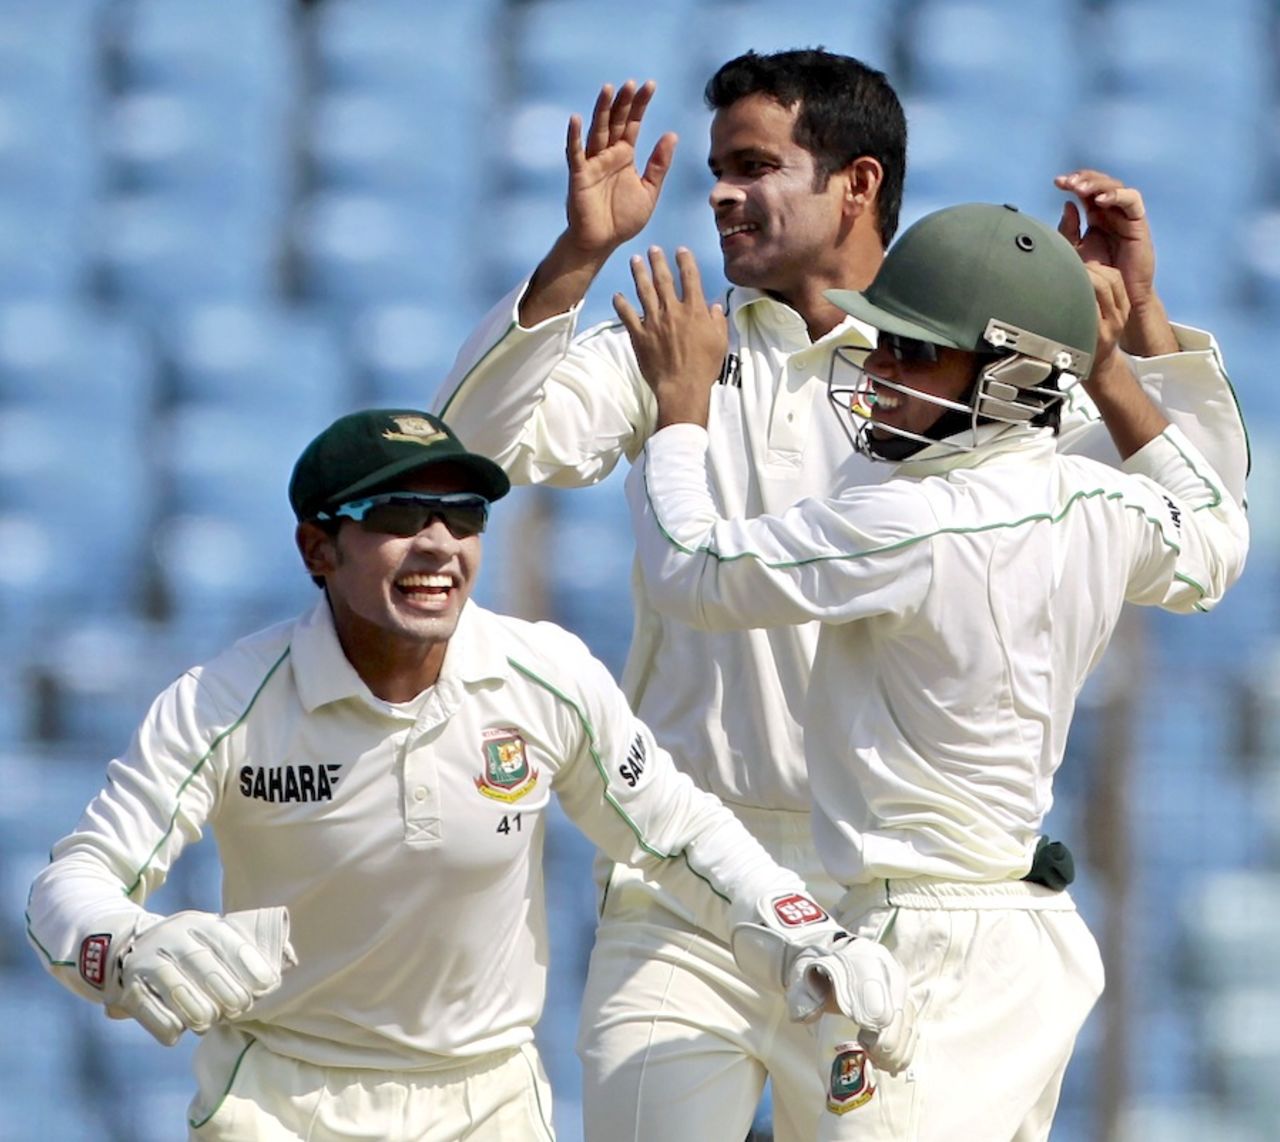 The Bangladesh players celebrate the wicket of Corey Anderson, Bangladesh v New Zealand, 1st Test, Chittagong, day 2, October 10, 2013